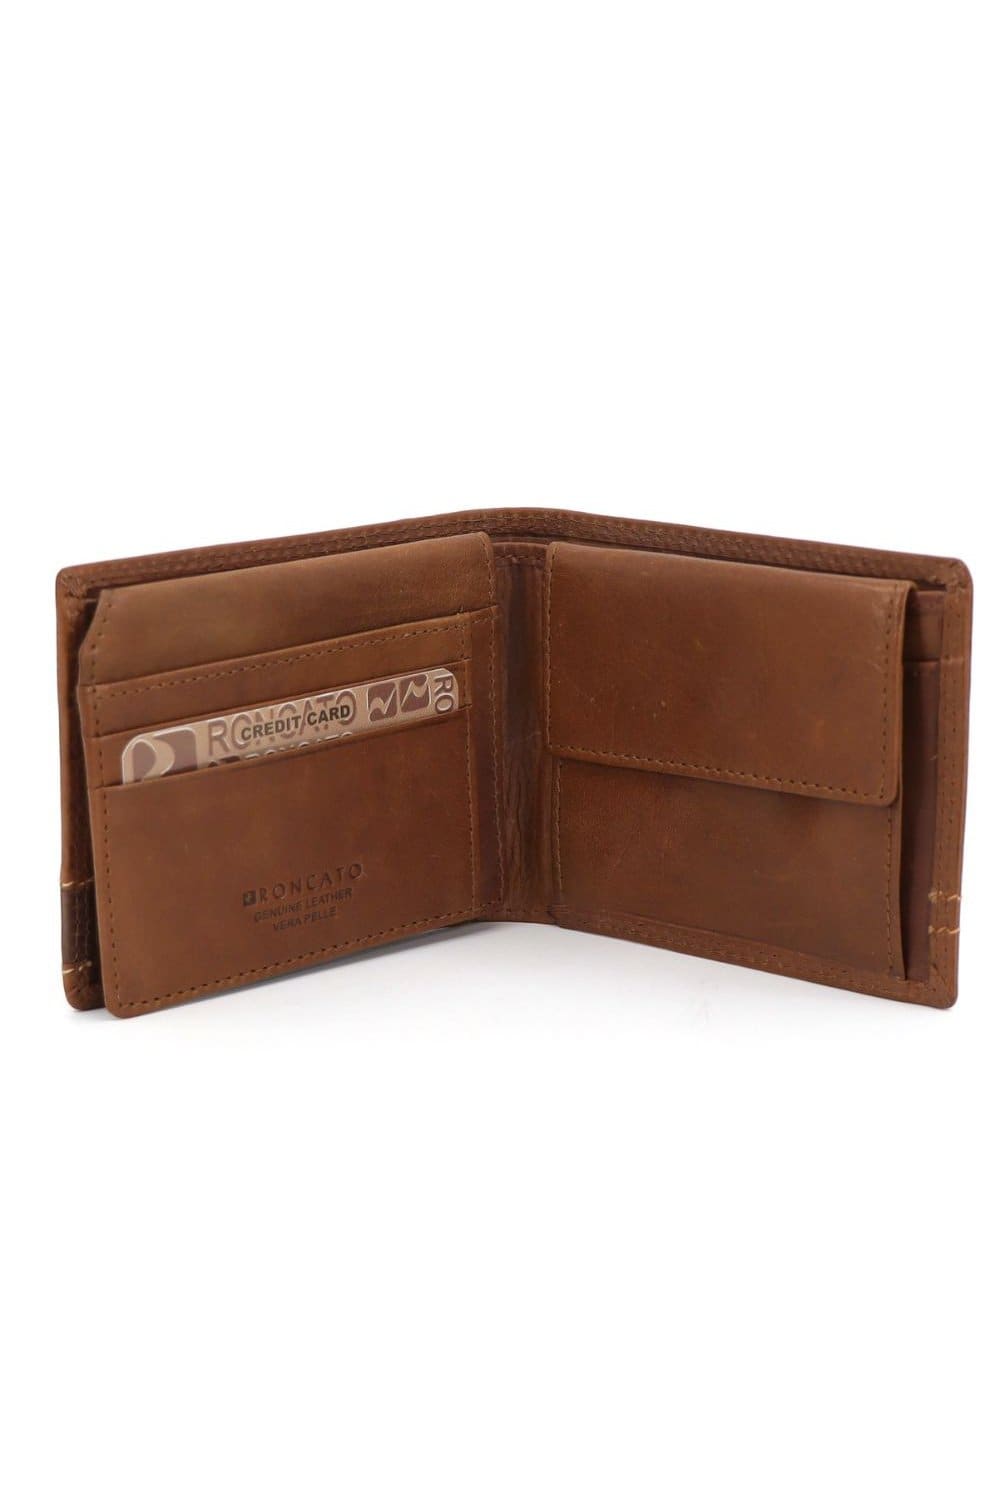 R. Roncato Men's Leather Wallet, Equipped With Coin Purse, Spaces for Credit Cards, Identity Card and Banknotes, Camel Fatio General Trading